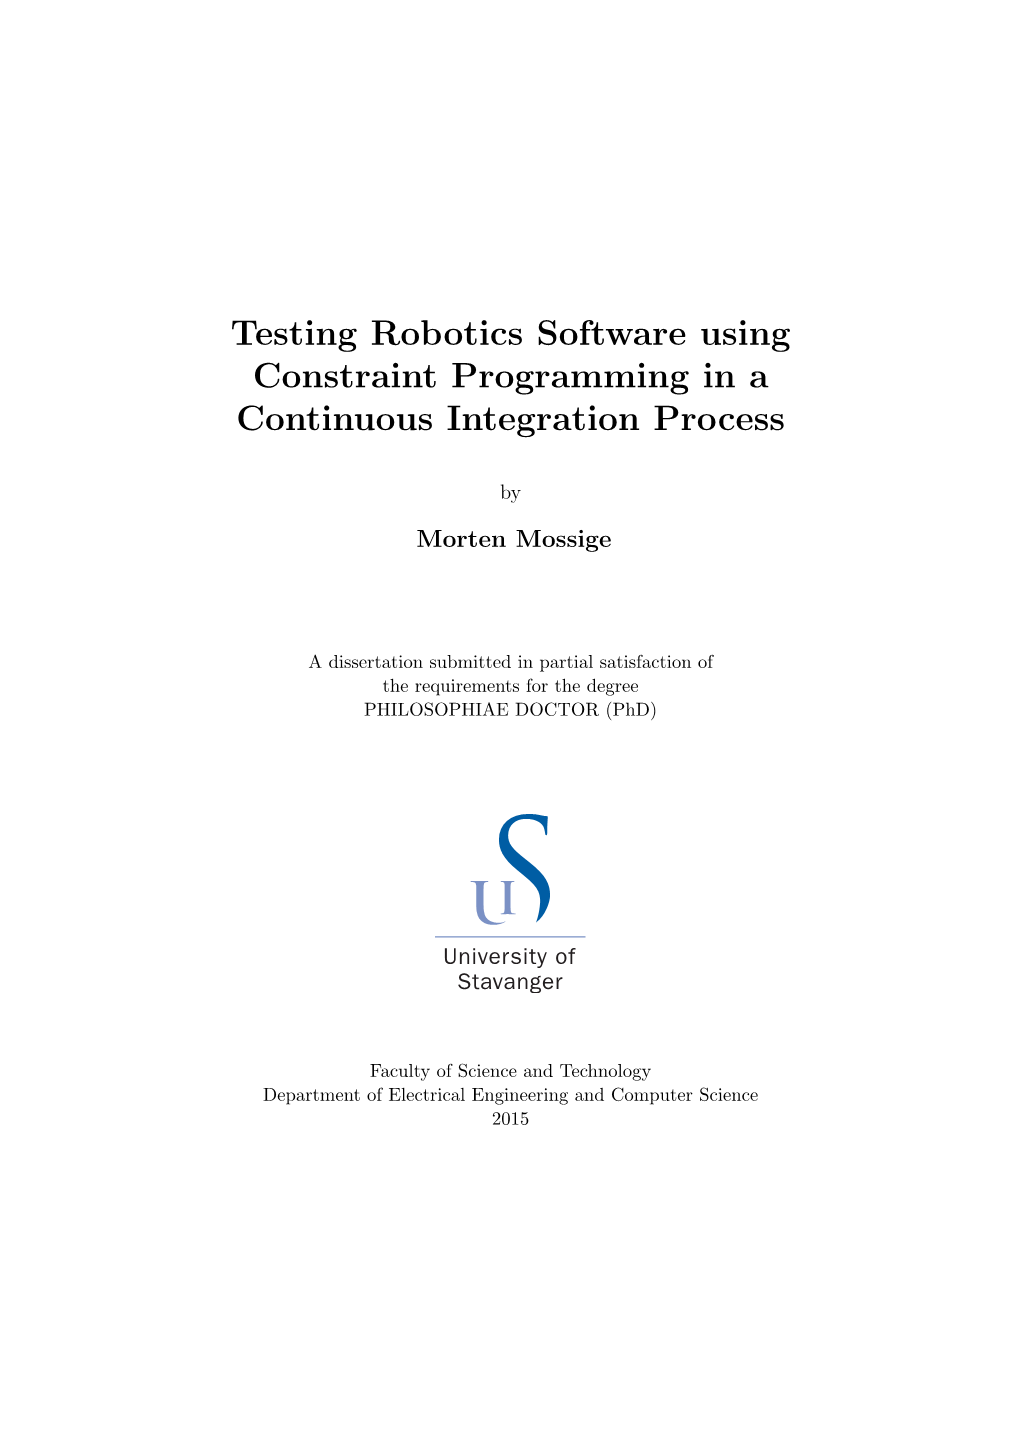 Testing Robotics Software Using Constraint Programming in a Continuous Integration Process